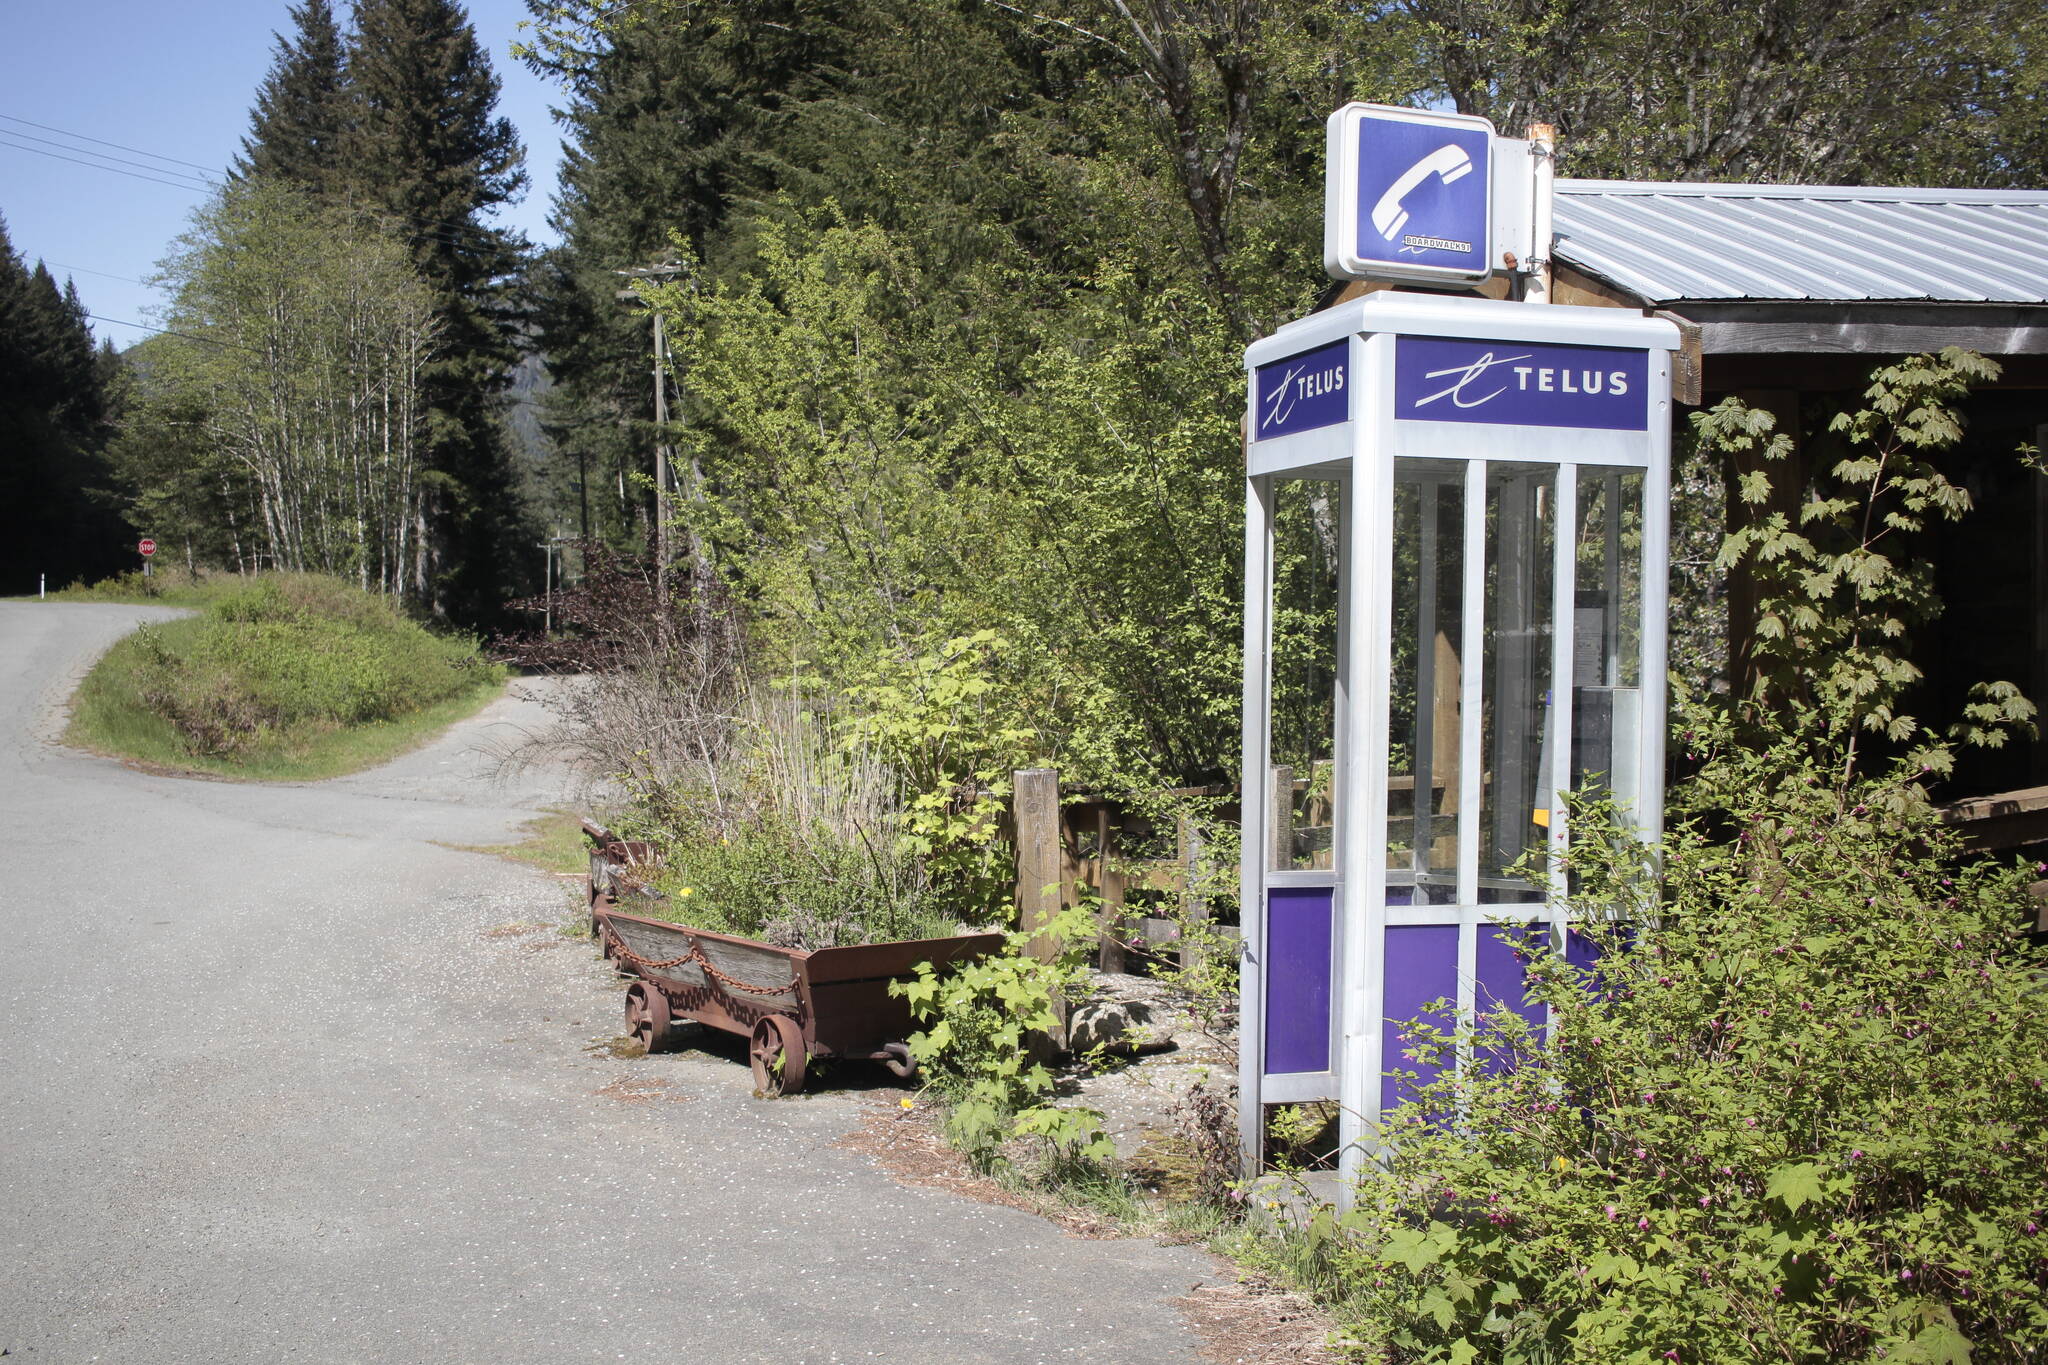 The area has no cell service, though Telus has posted a notice saying it “will continue to invest to bring you the latest connectivity, including our next-generation 5G network.” Photo by Marc Kitteringham/Campbell River Mirror